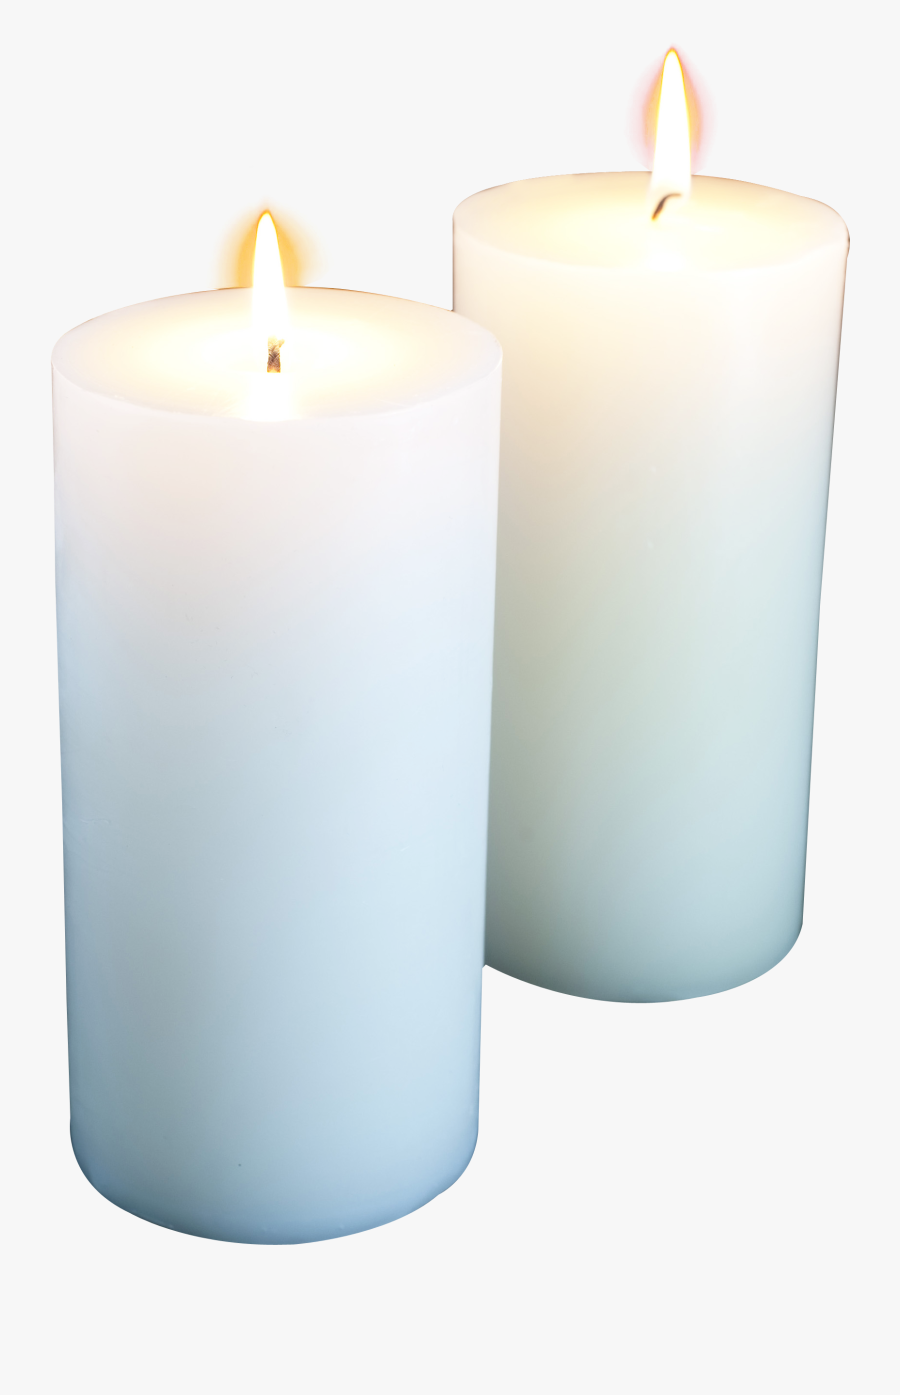 Clipart Candle Church Candle - Candle Png, Transparent Clipart